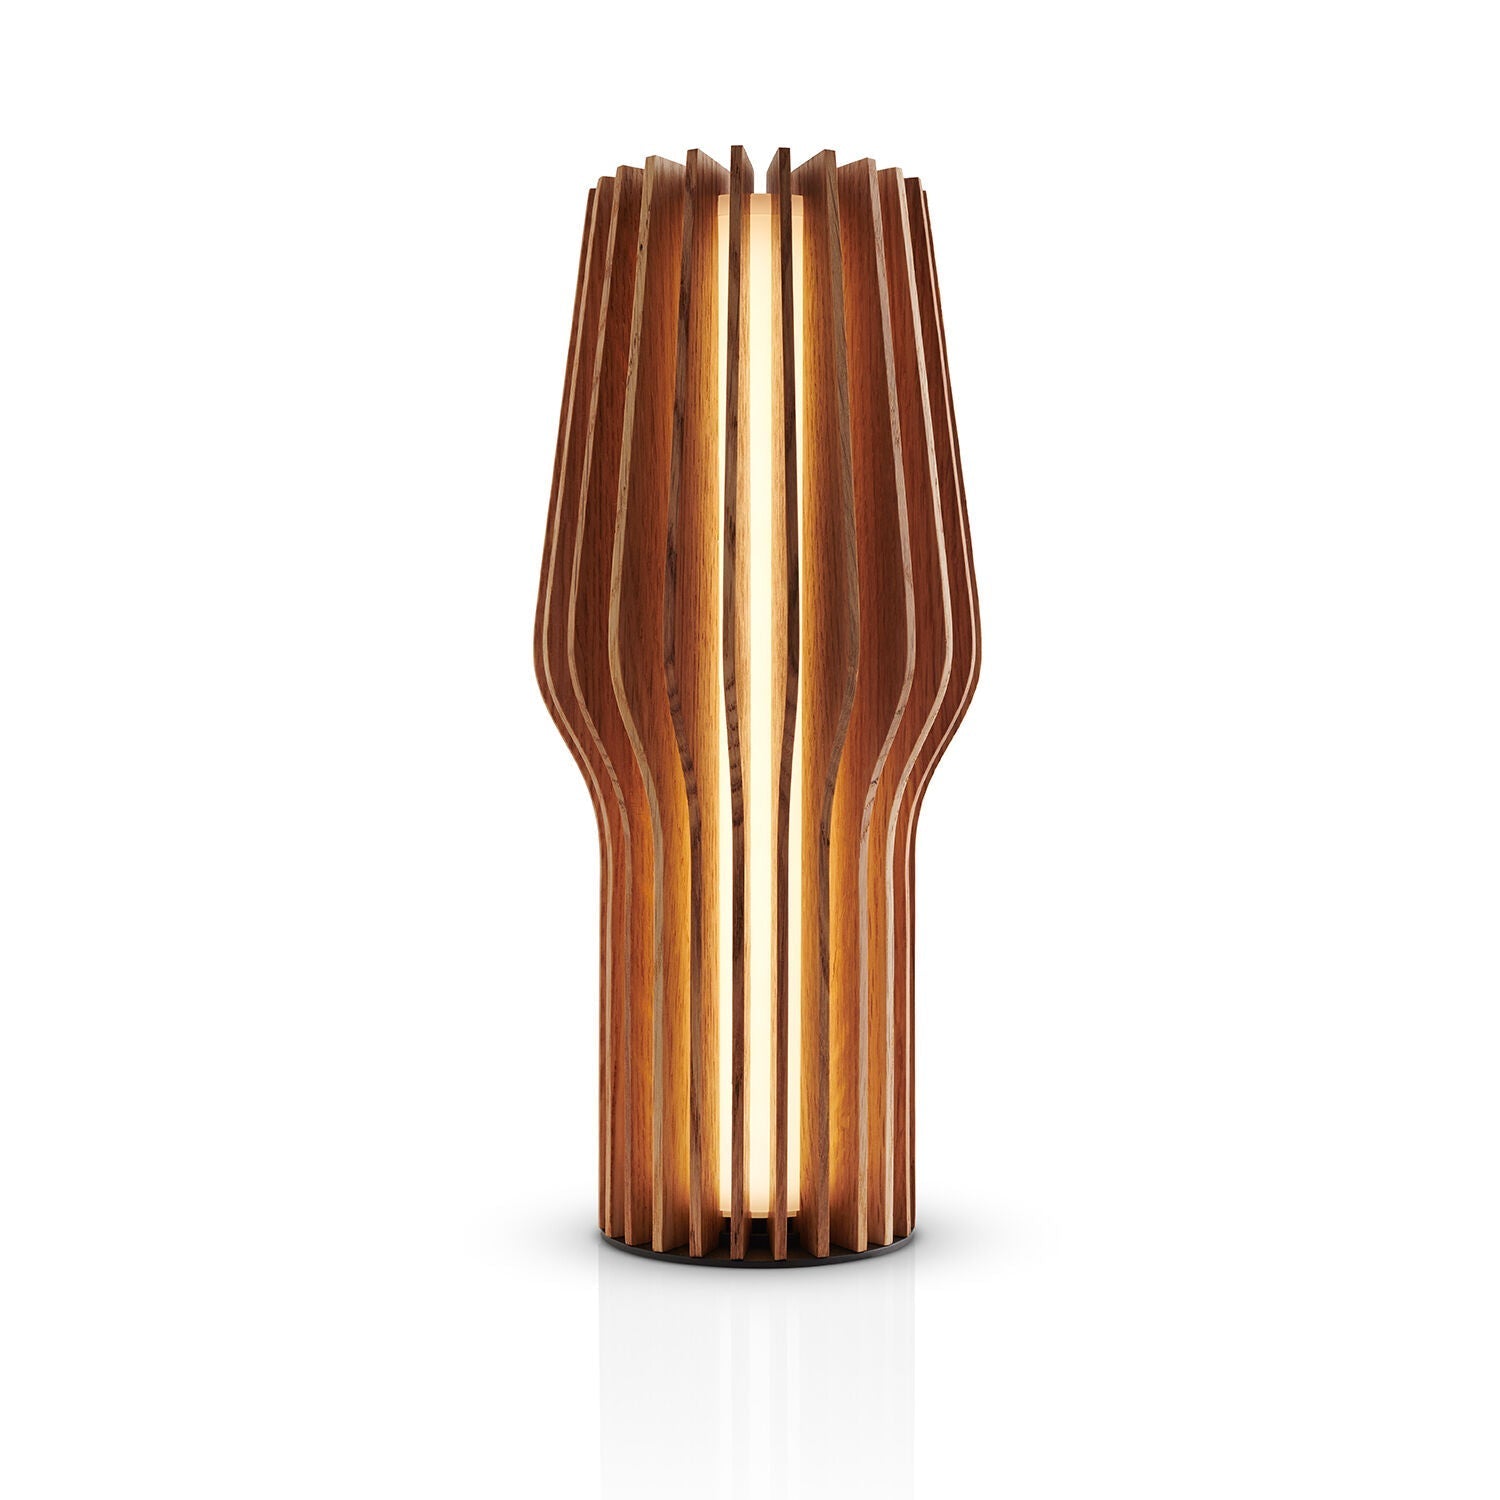 Buy Eva Solo Radiant Table Lamp in Oak Table Lamps The Eva Solo Radiant Table Lamp in Oak is the perfect way to infuse "hygge" into your home. Cordless and with a touch-sensitive switch, it can easily be placed on your bookshelf or patio to create an invi